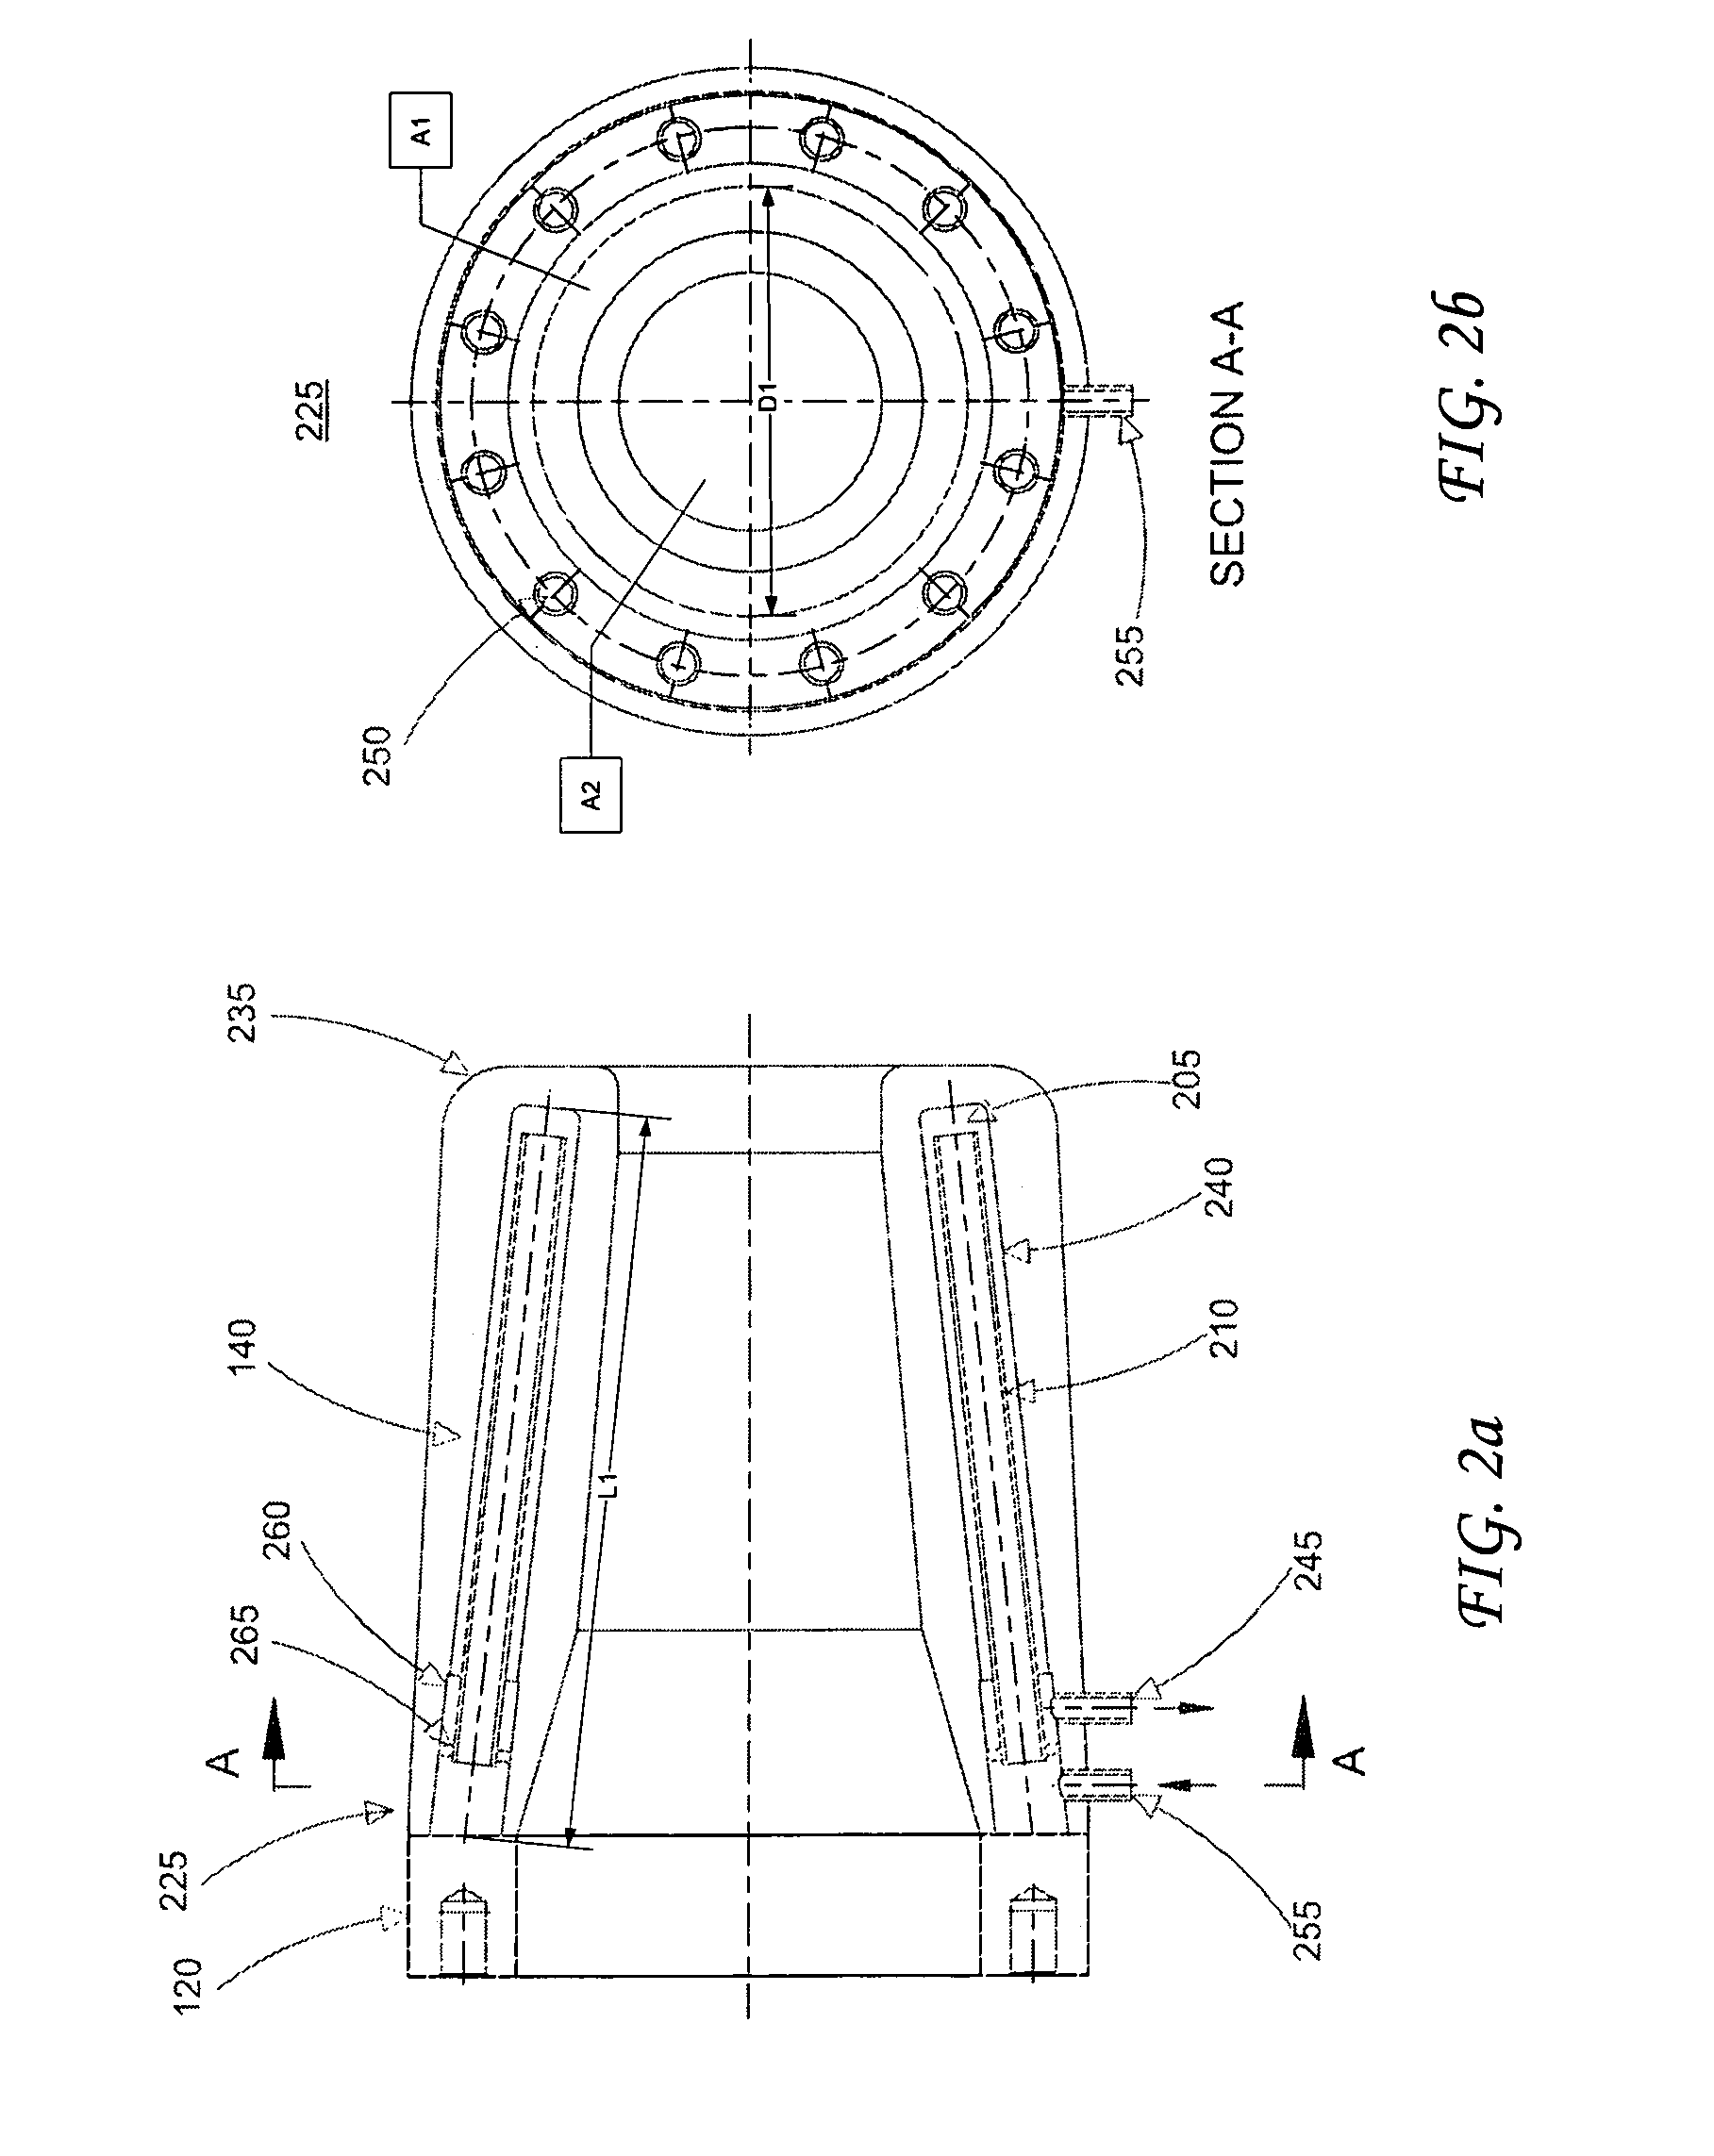 Cooling device for use in an electric arc furnace